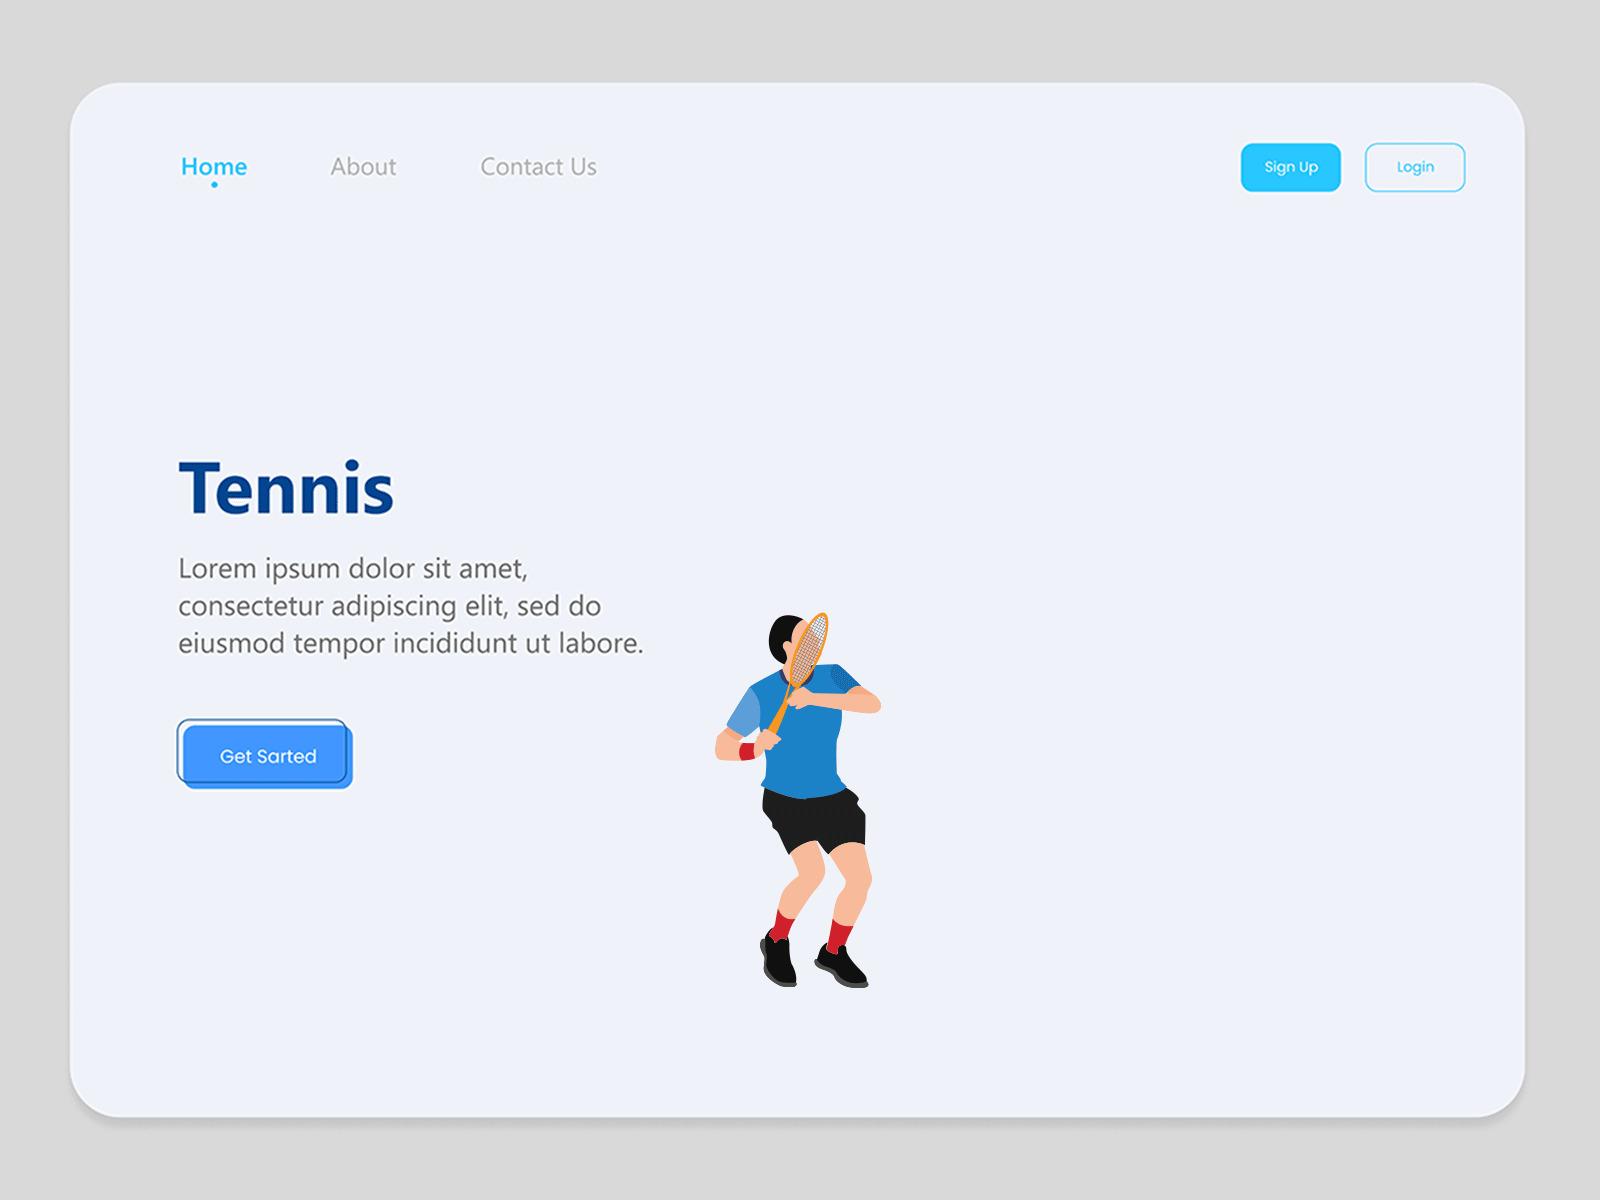 Landing page - Tennis Sport animation animation2d app application awesome awesome design design illustration inspiration inspirations sport tennis trend trendy design ui ui design vector